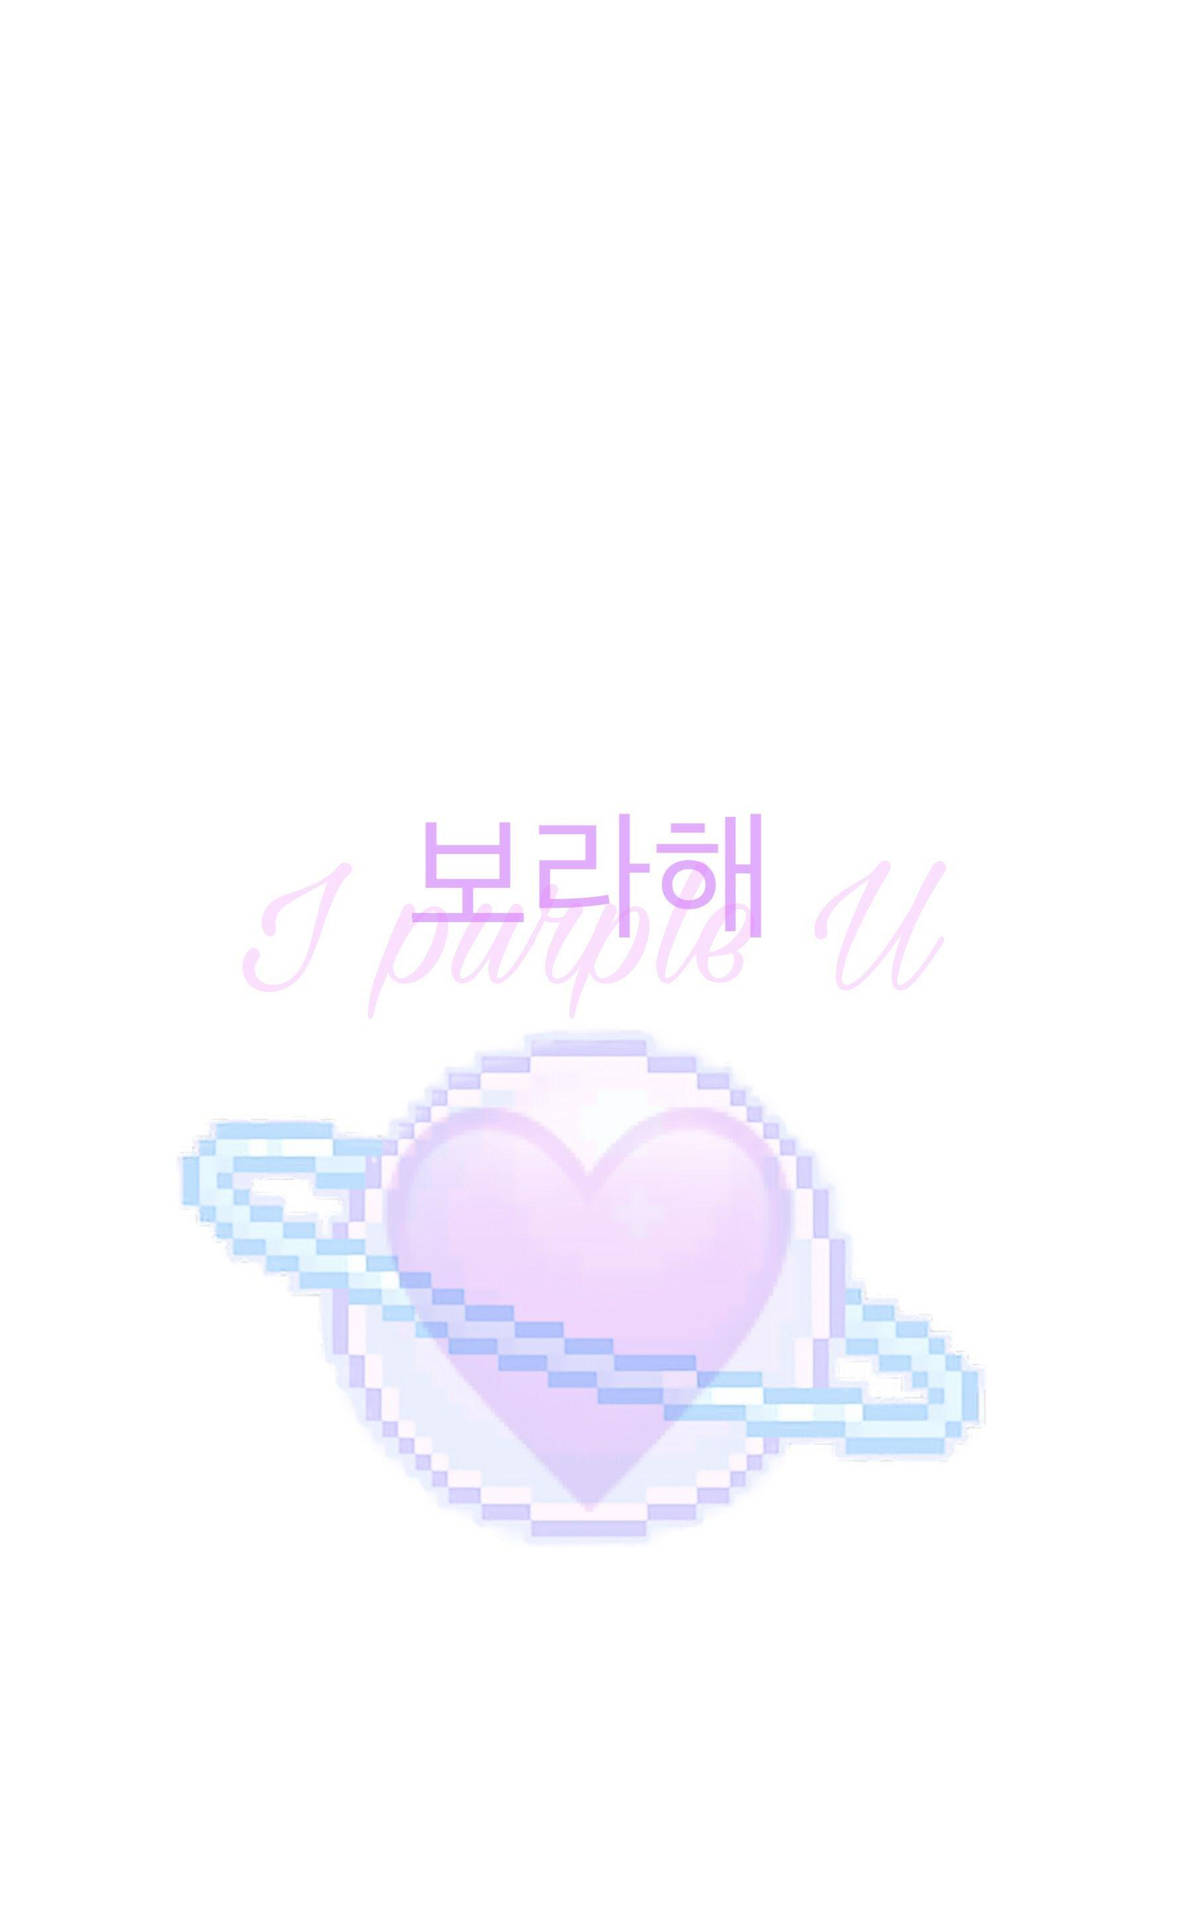 Heart Saturn Planet I Purple You Background